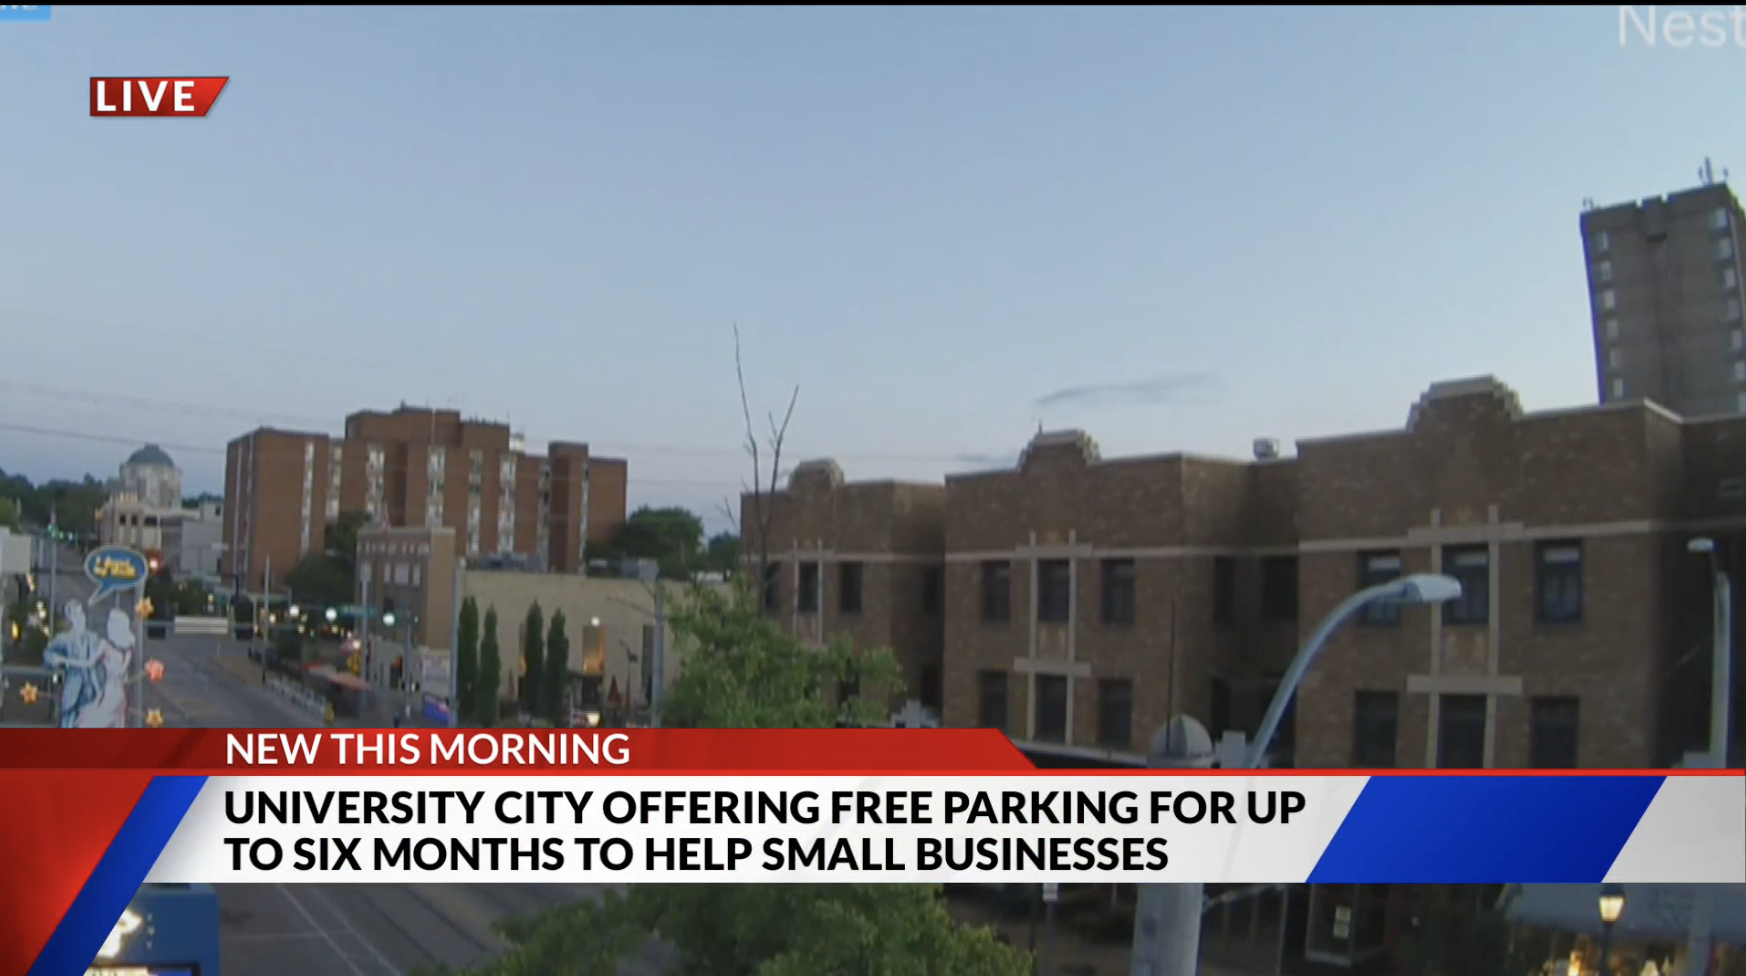 University City waiving parking meter fees to help small businesses